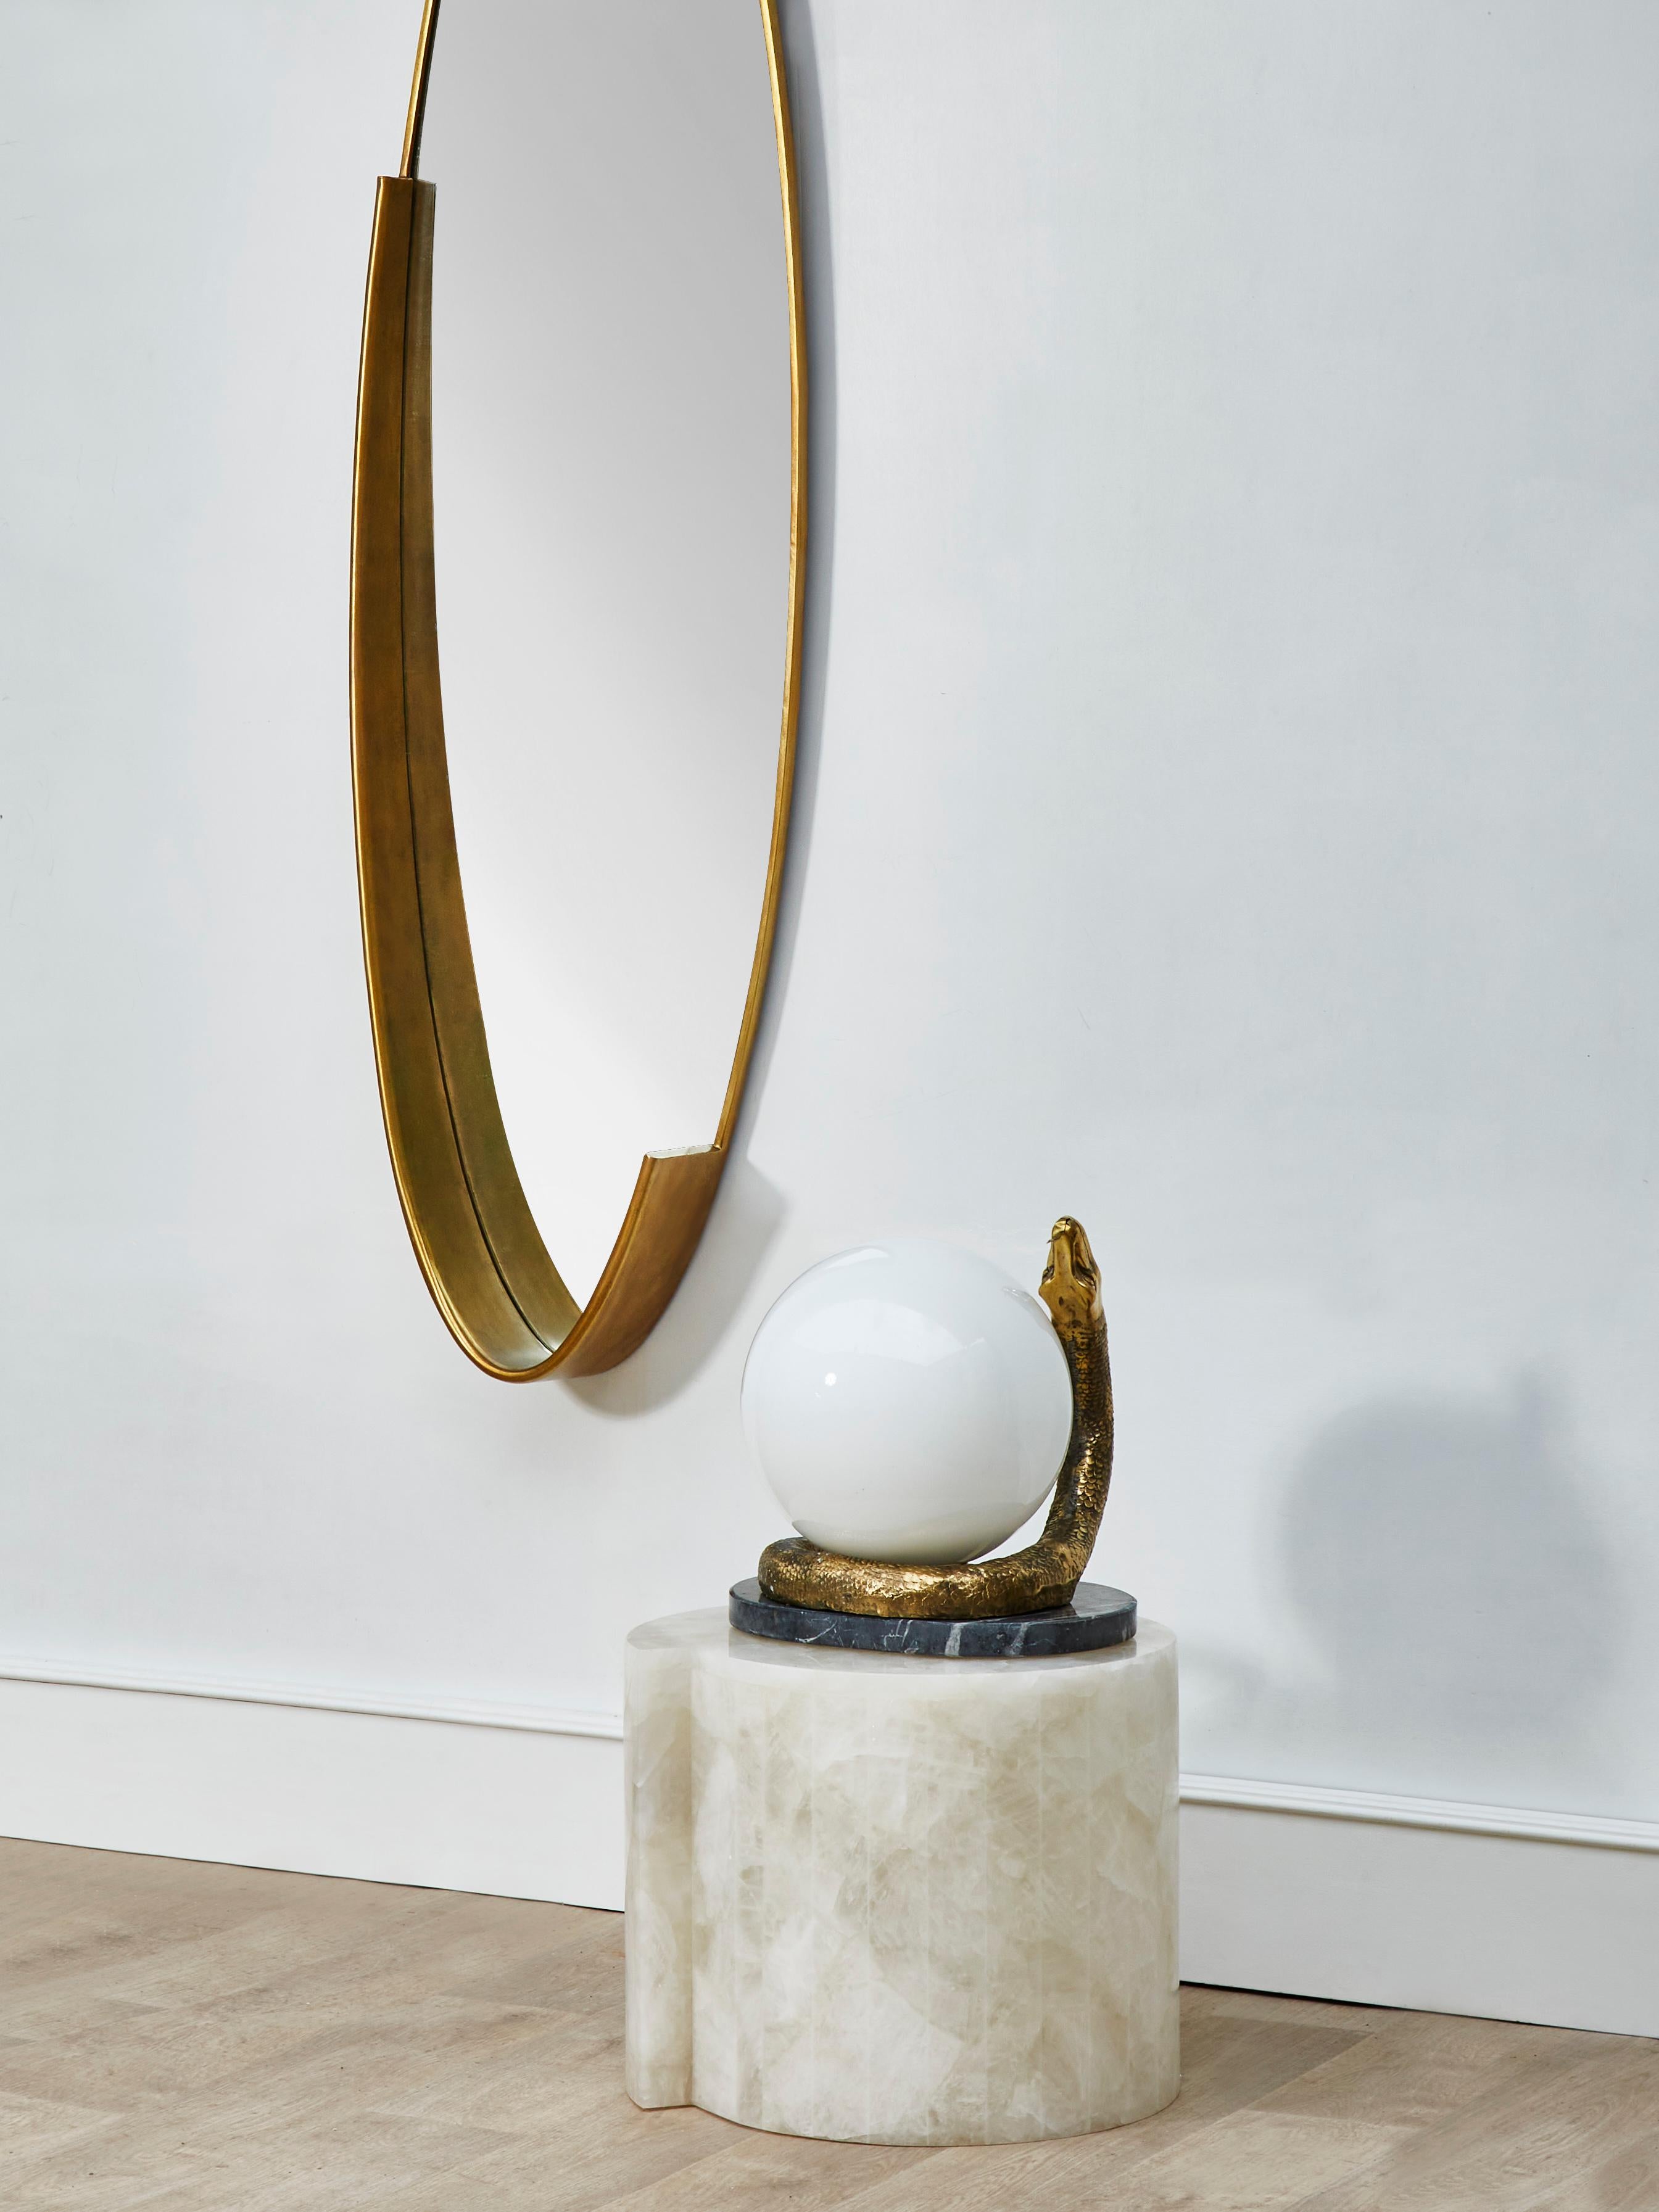 Stunning table lamp with a sculpted brass Snake, surrounding an opaline glass globe. Marble base.
Création by Studio Glustin.
2021.